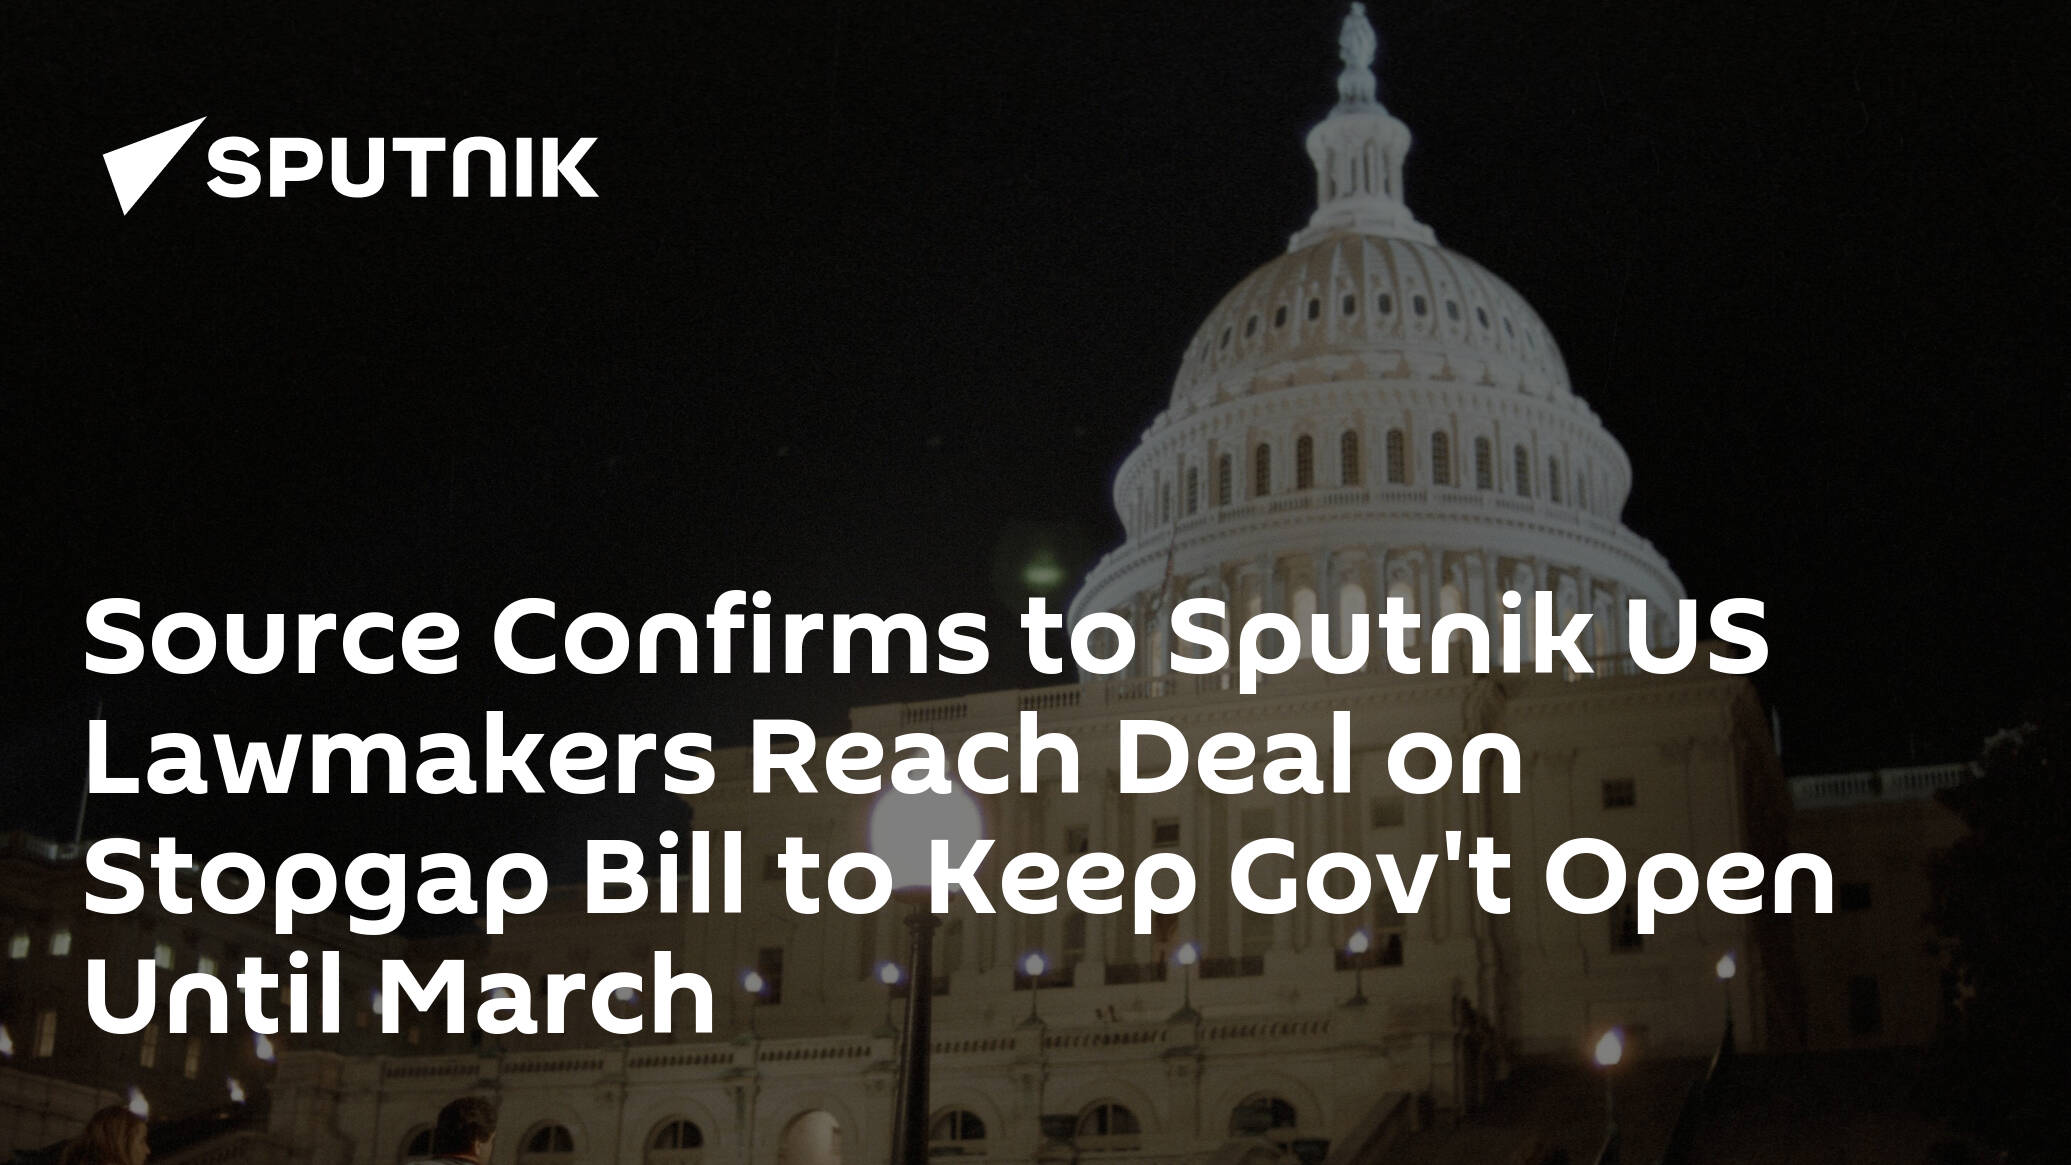 Source Confirms to Sputnik US Lawmakers Reach Deal on Stopgap Bill to Keep Gov't Open Until March